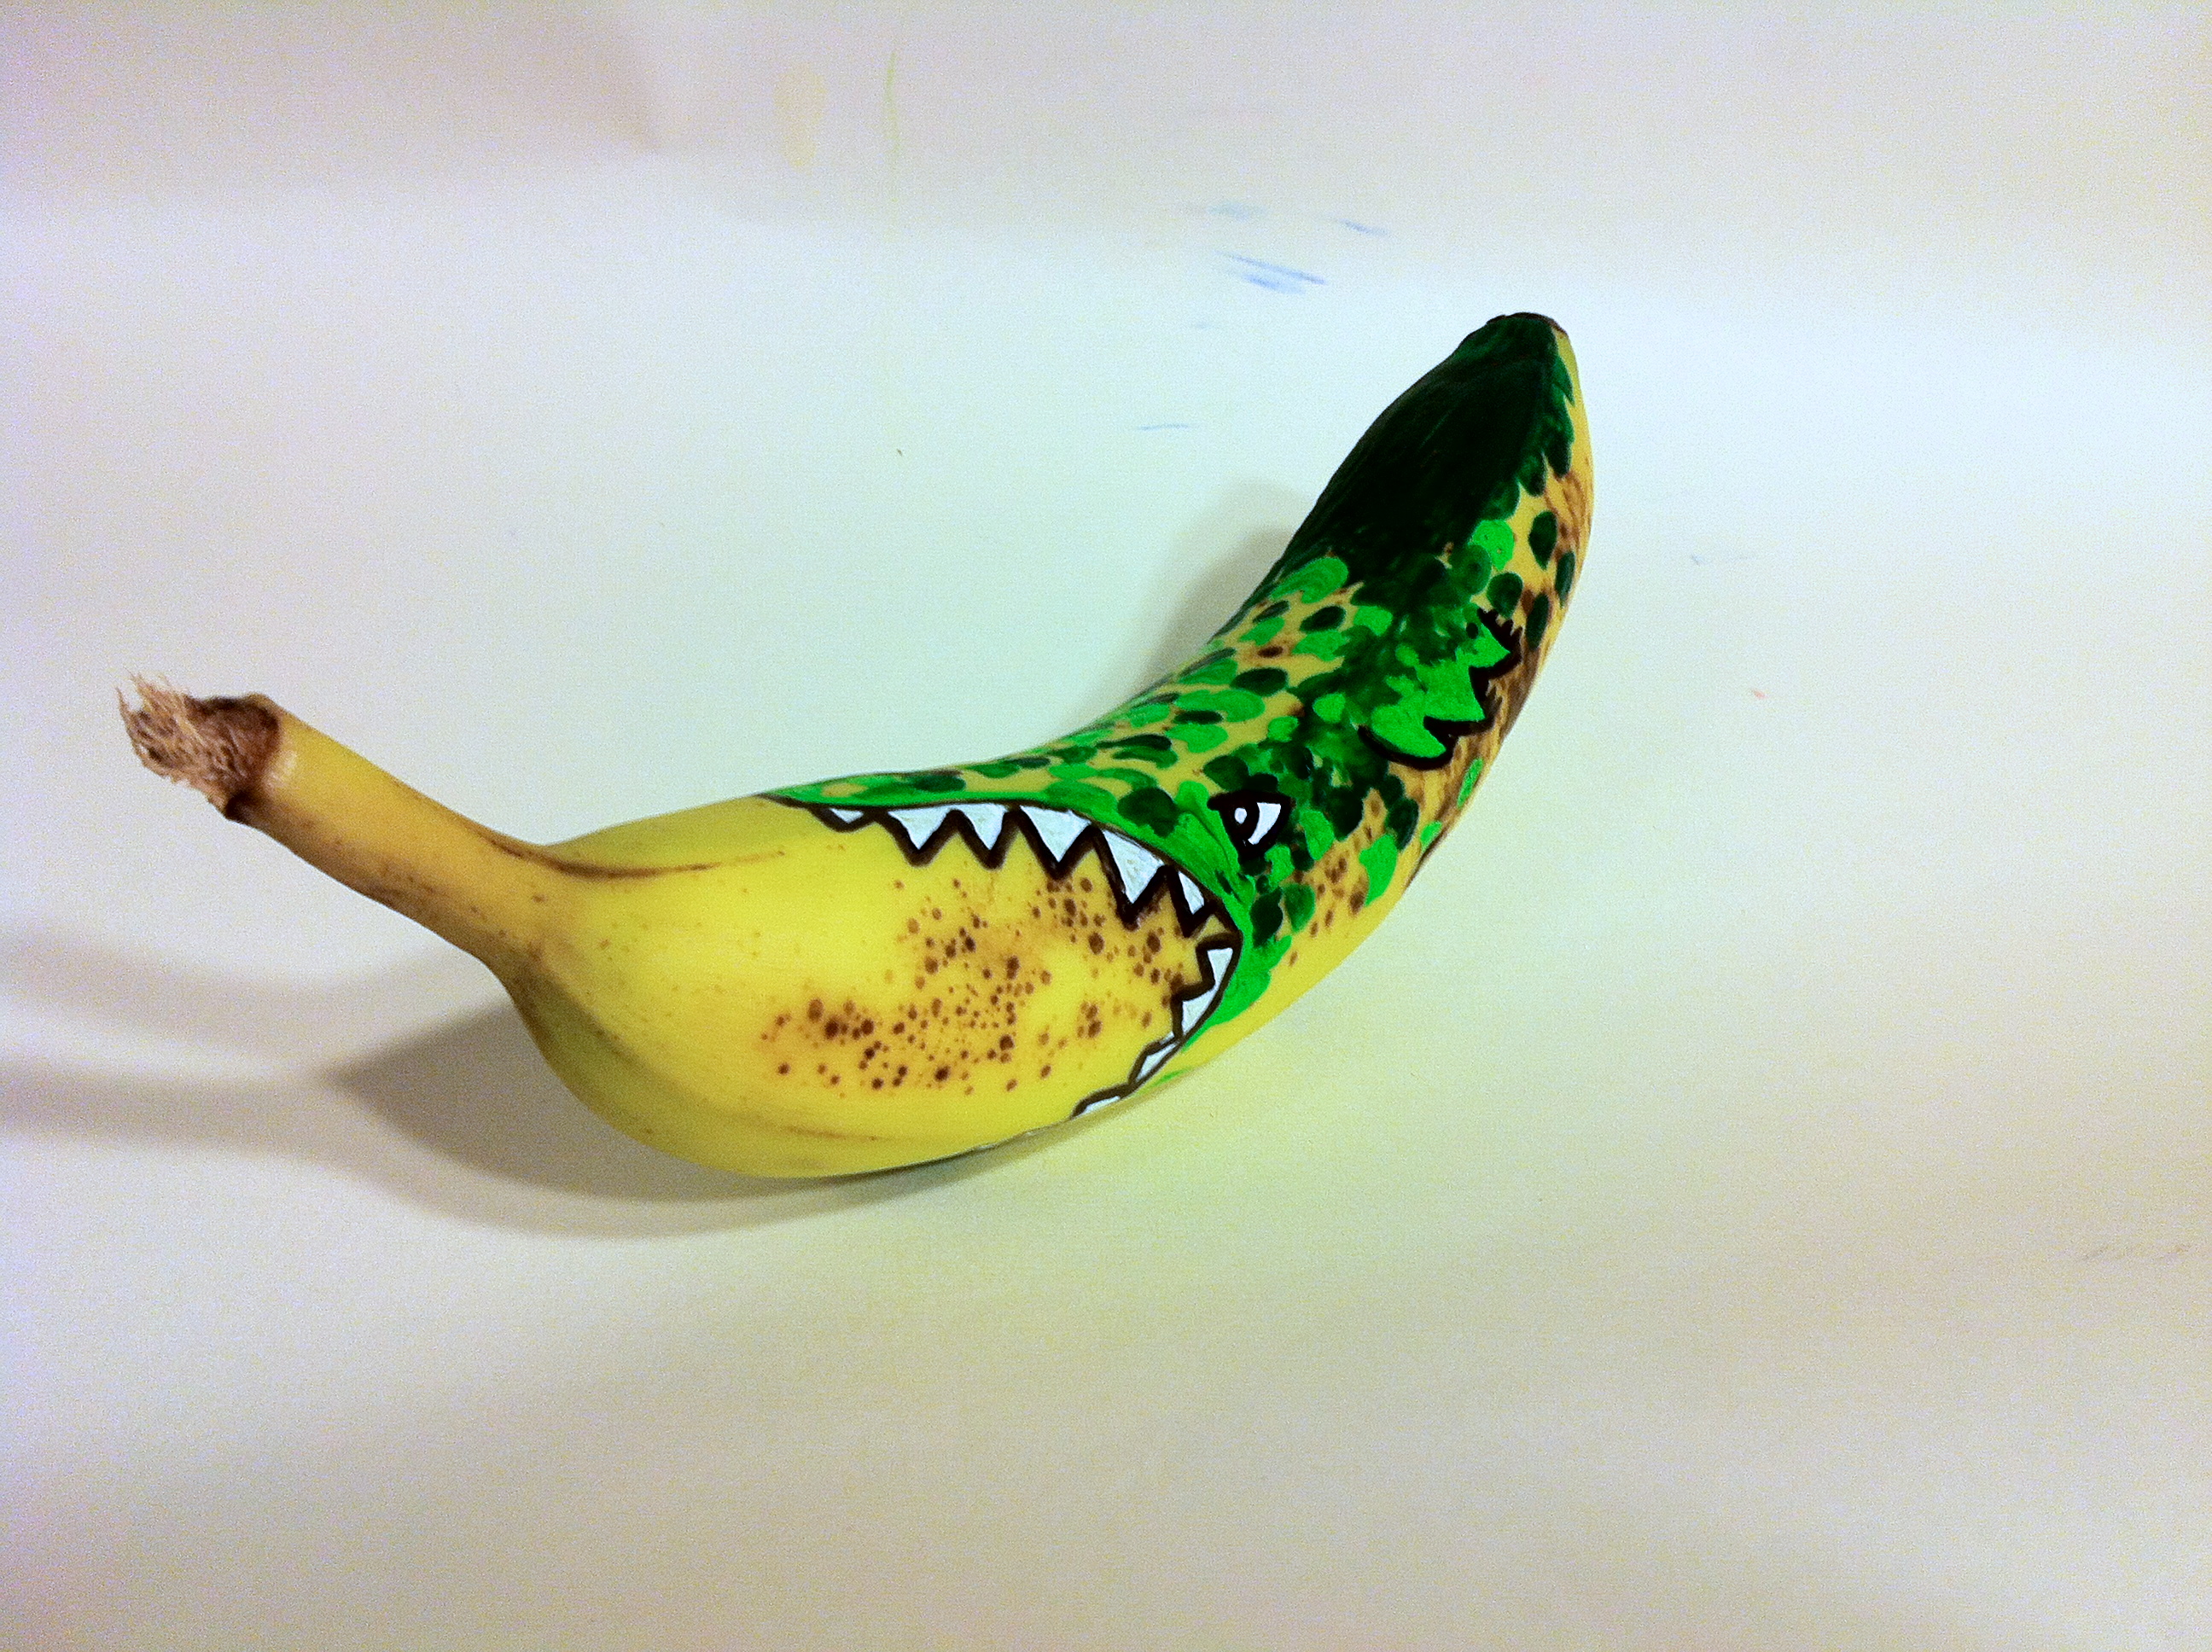 Painted banana, a green monster is painted on to the banana. this creates an illusion that the monster is eating the banana.